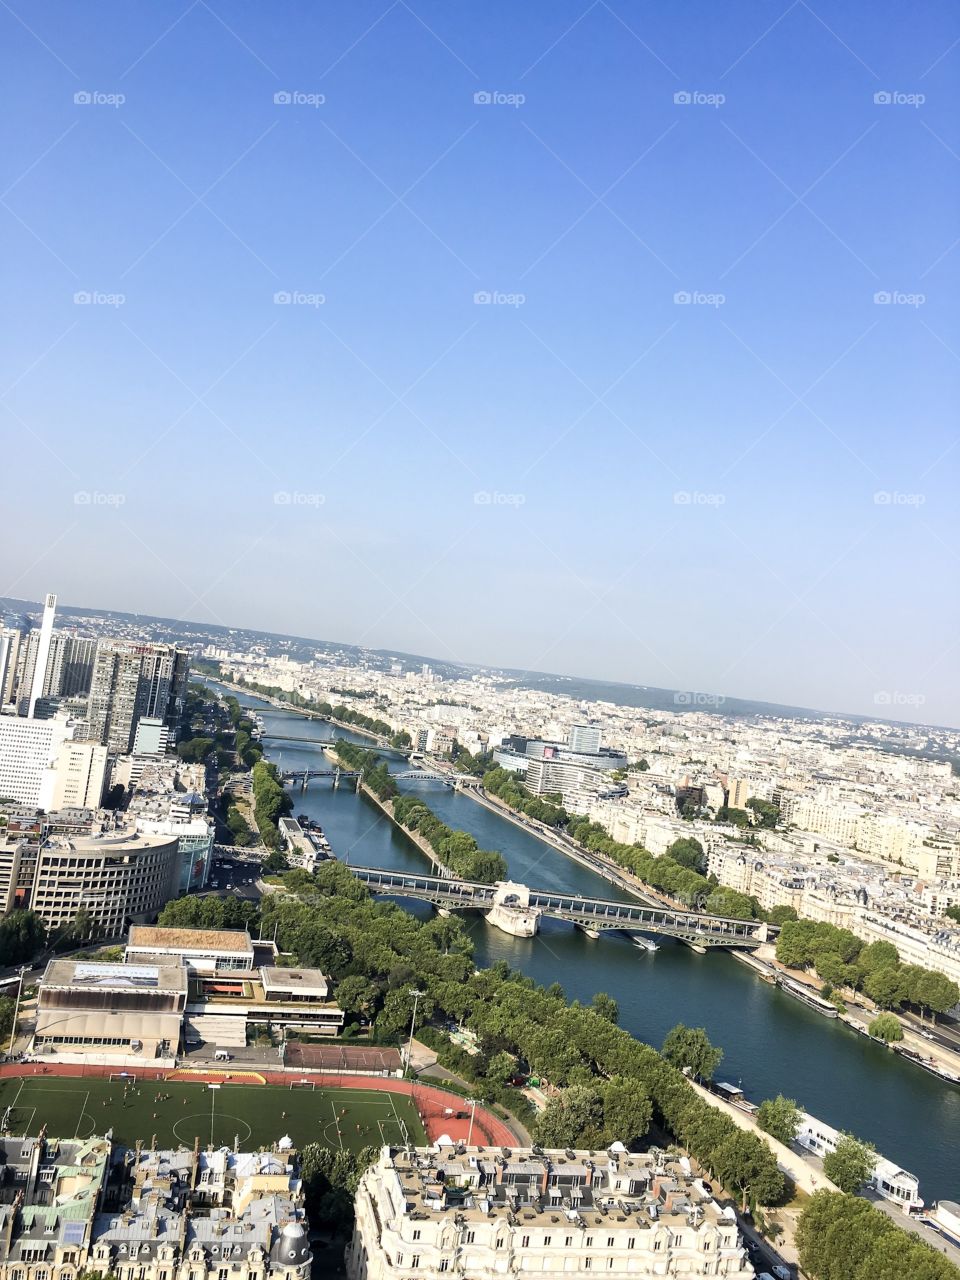 Paris from the Eiffel Tower. The sky is clear and blue, there is a great view of the Seine.